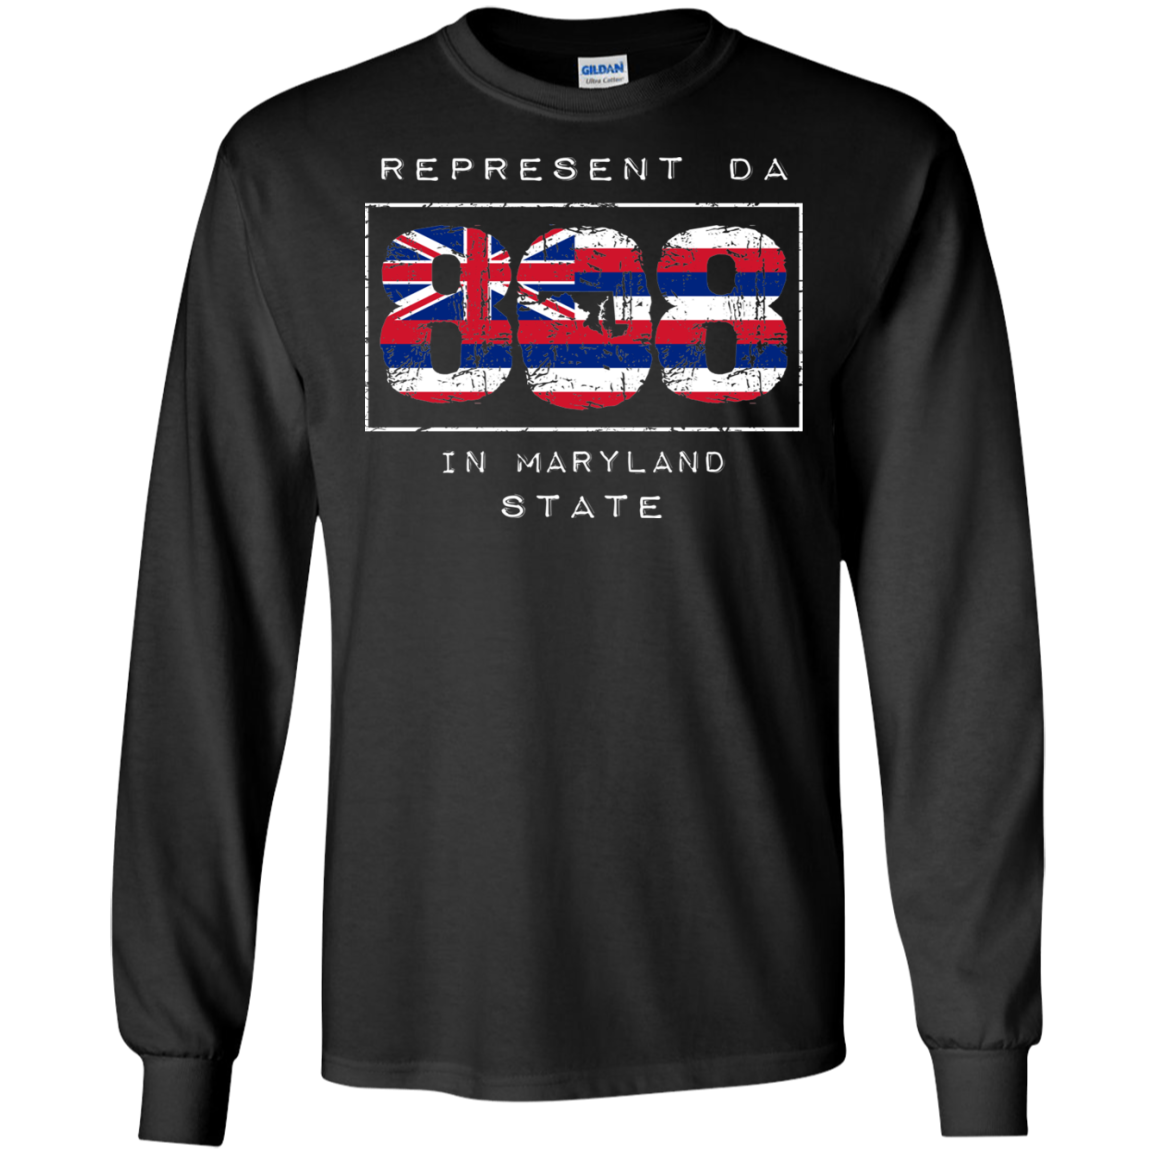 Rep Da 808 In Maryland State LS Ultra Cotton T-Shirt, T-Shirts, Hawaii Nei All Day